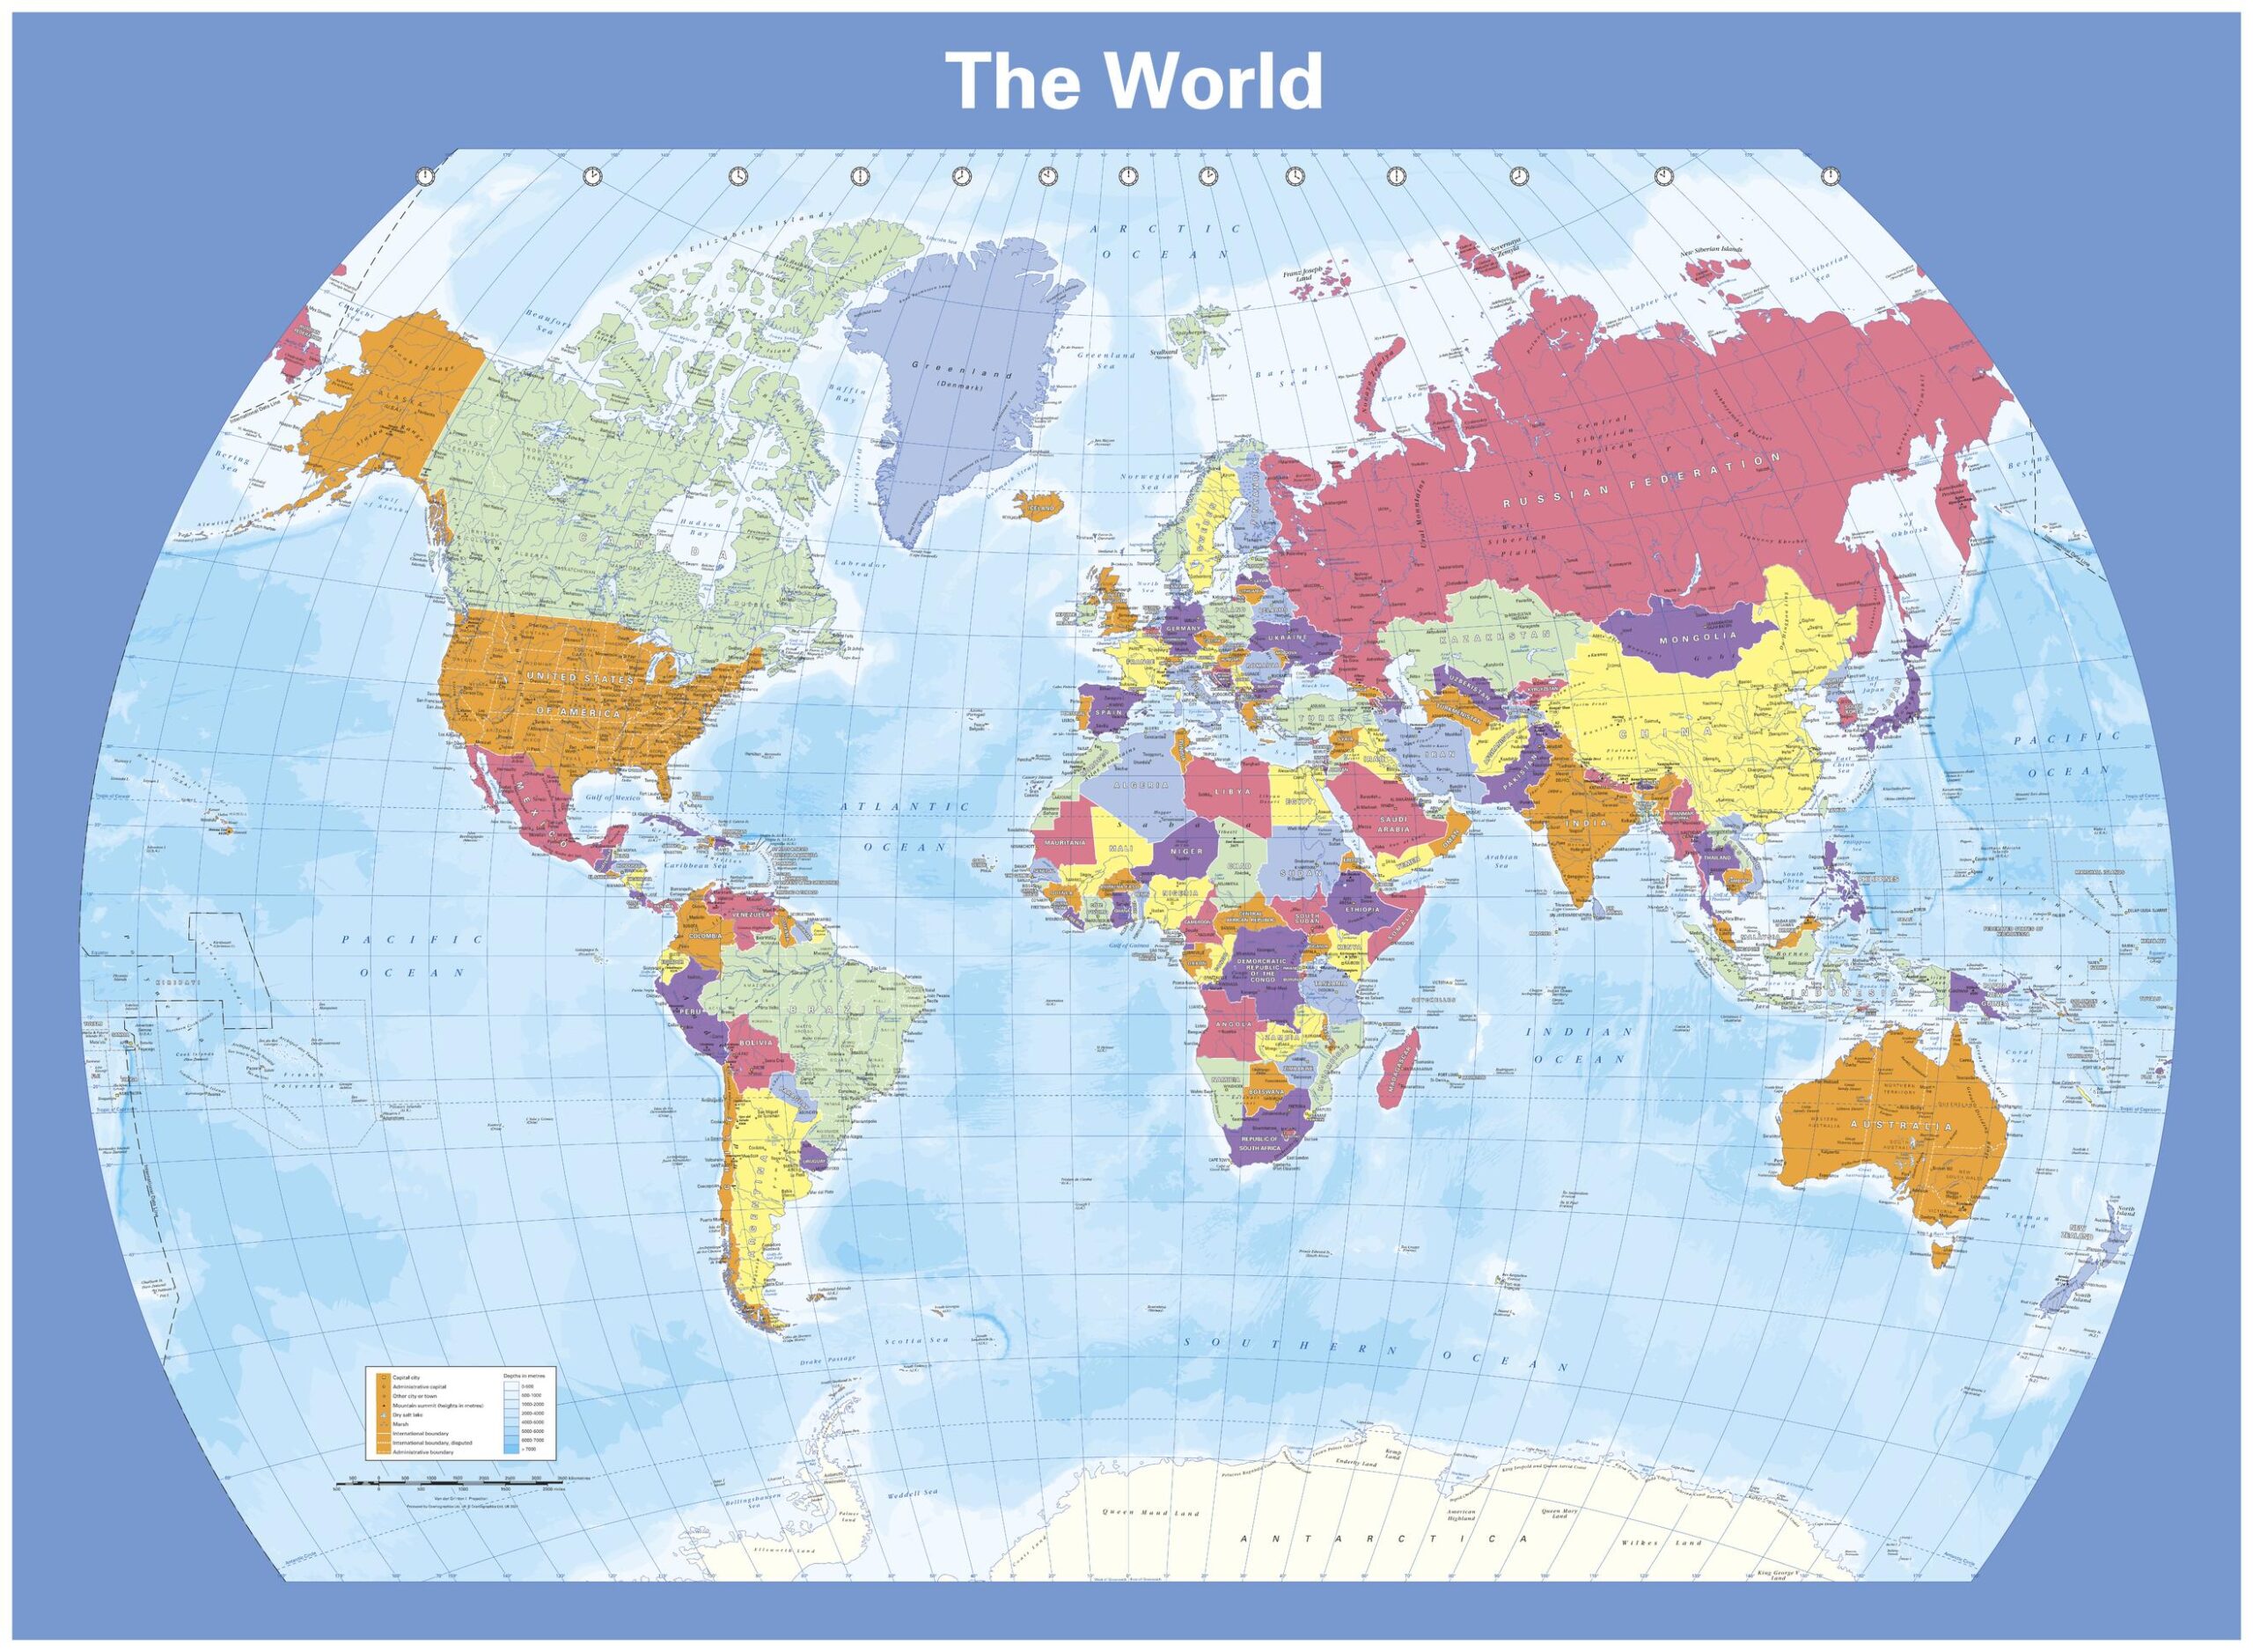 The World - Color blind friendly political world map by Cosmographics ...